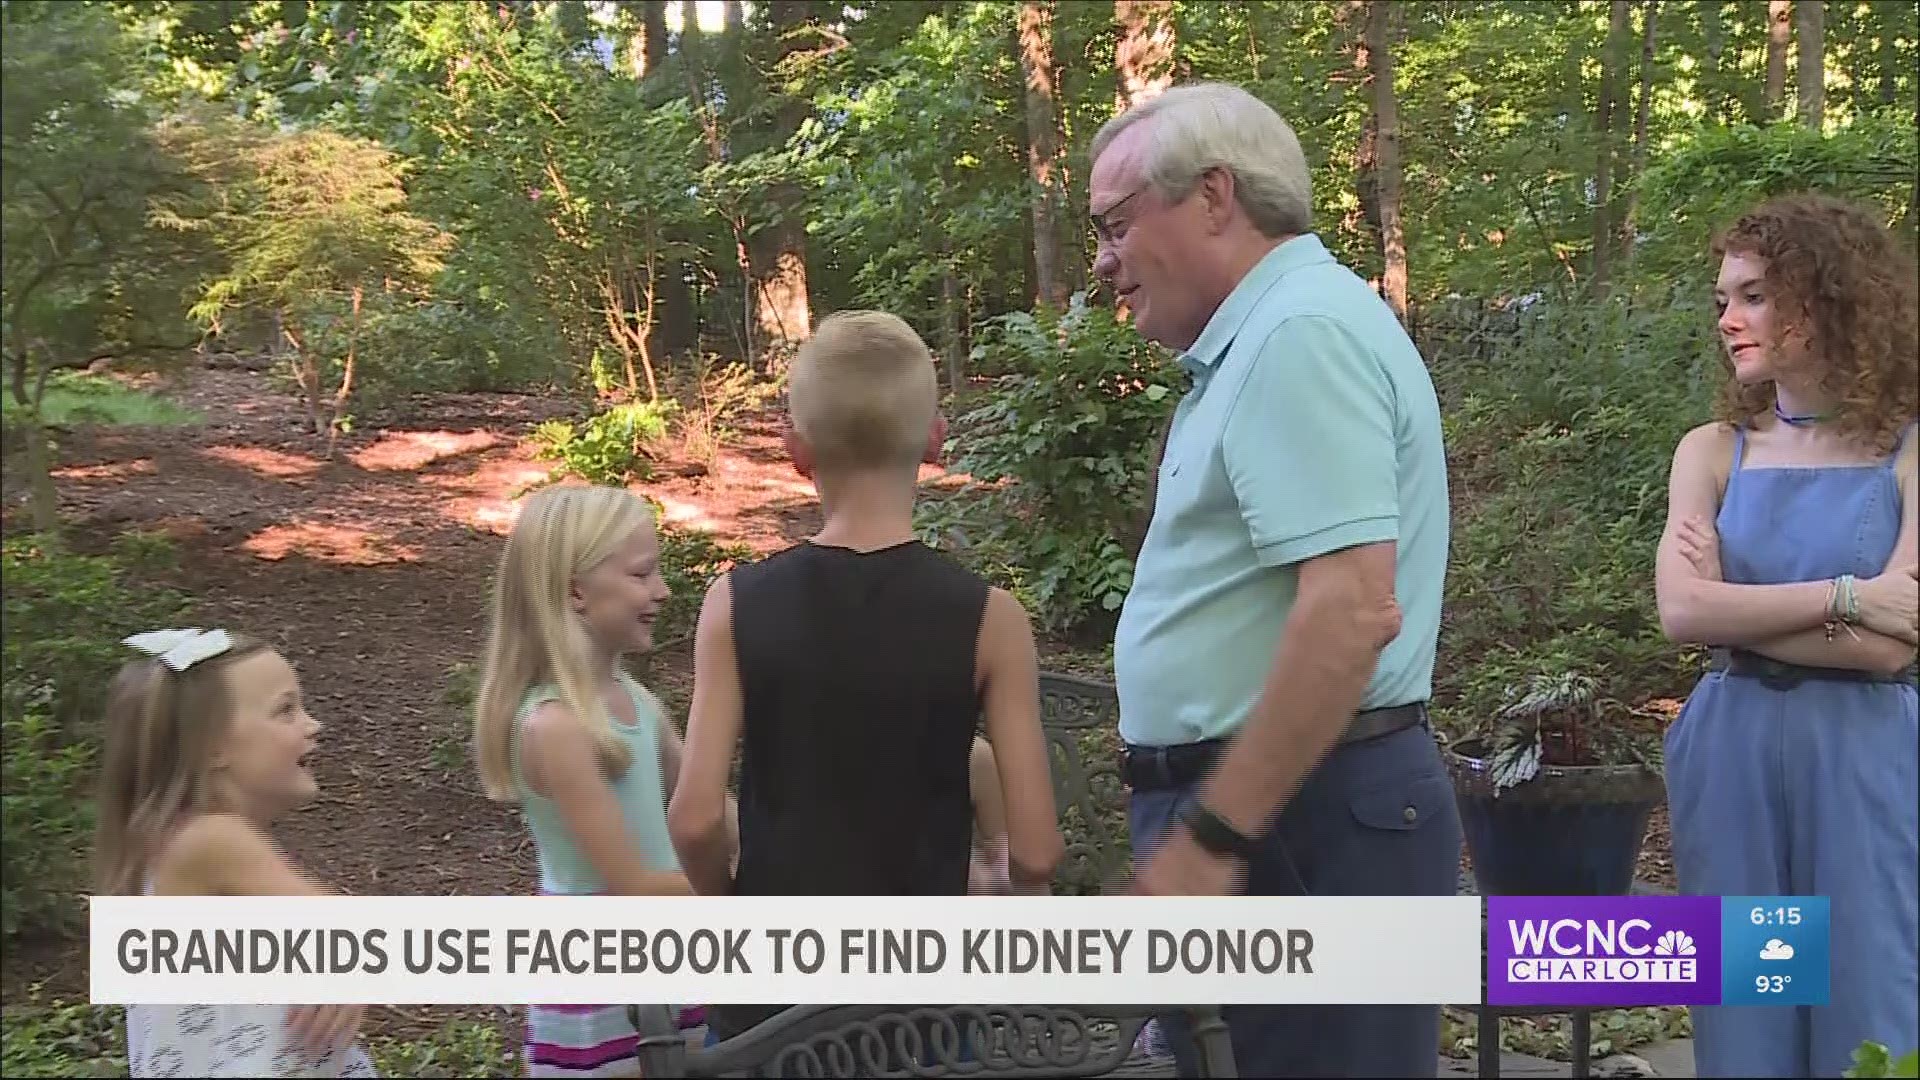 Grandkids use Facebook to search for kidney donor for Grandpa